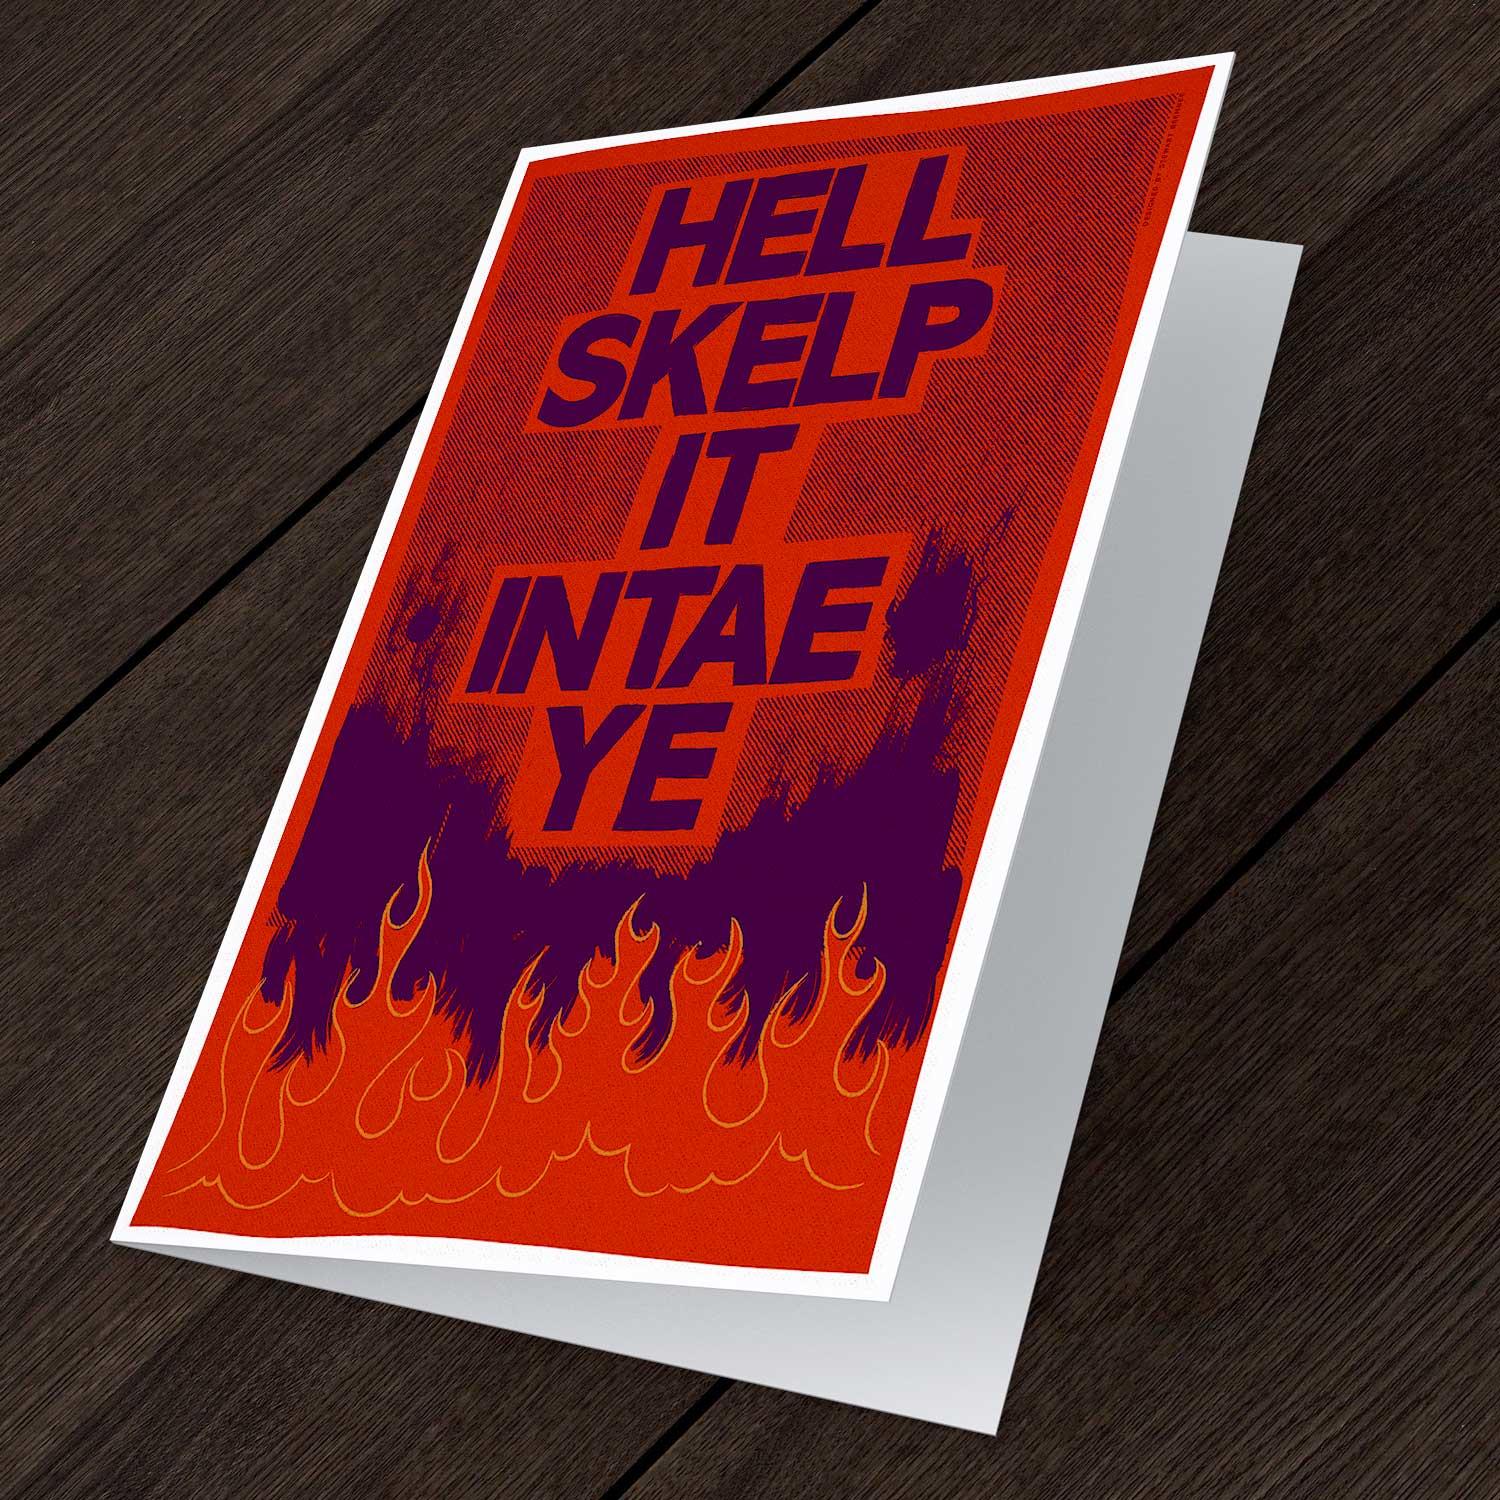 Hell Slap it Intae Ye Greeting Card from an original painting by artist Stewart Bremner